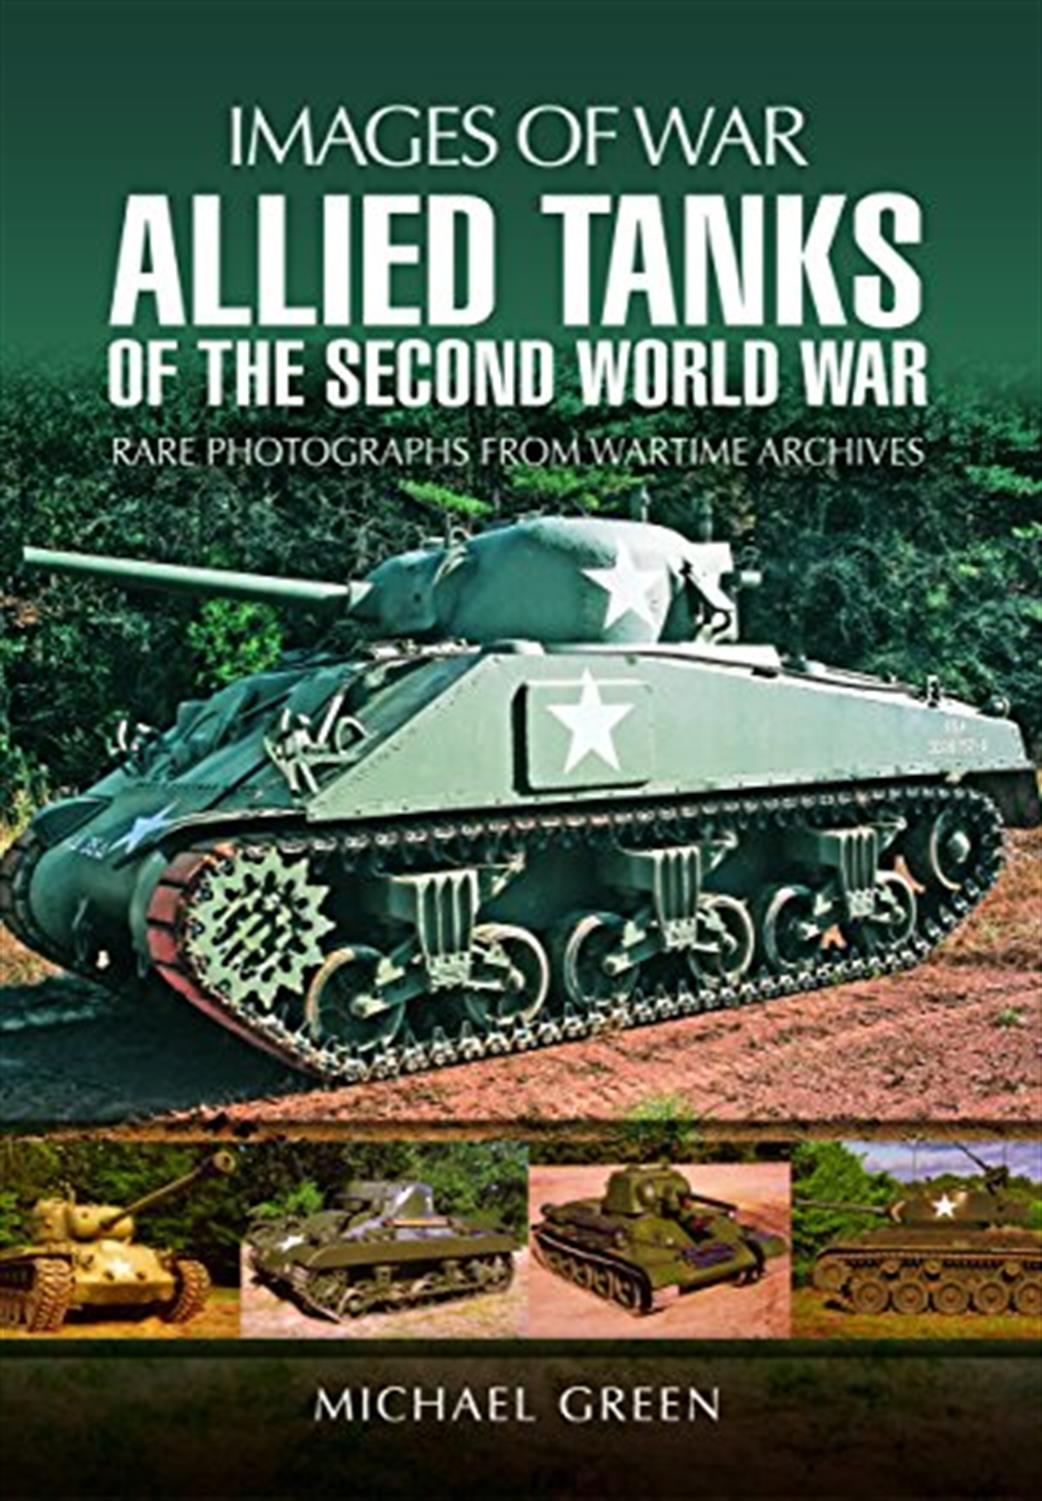 Pen & Sword  9781473866768 Images of War Allied Tanks of The Second World War book by Michael Green